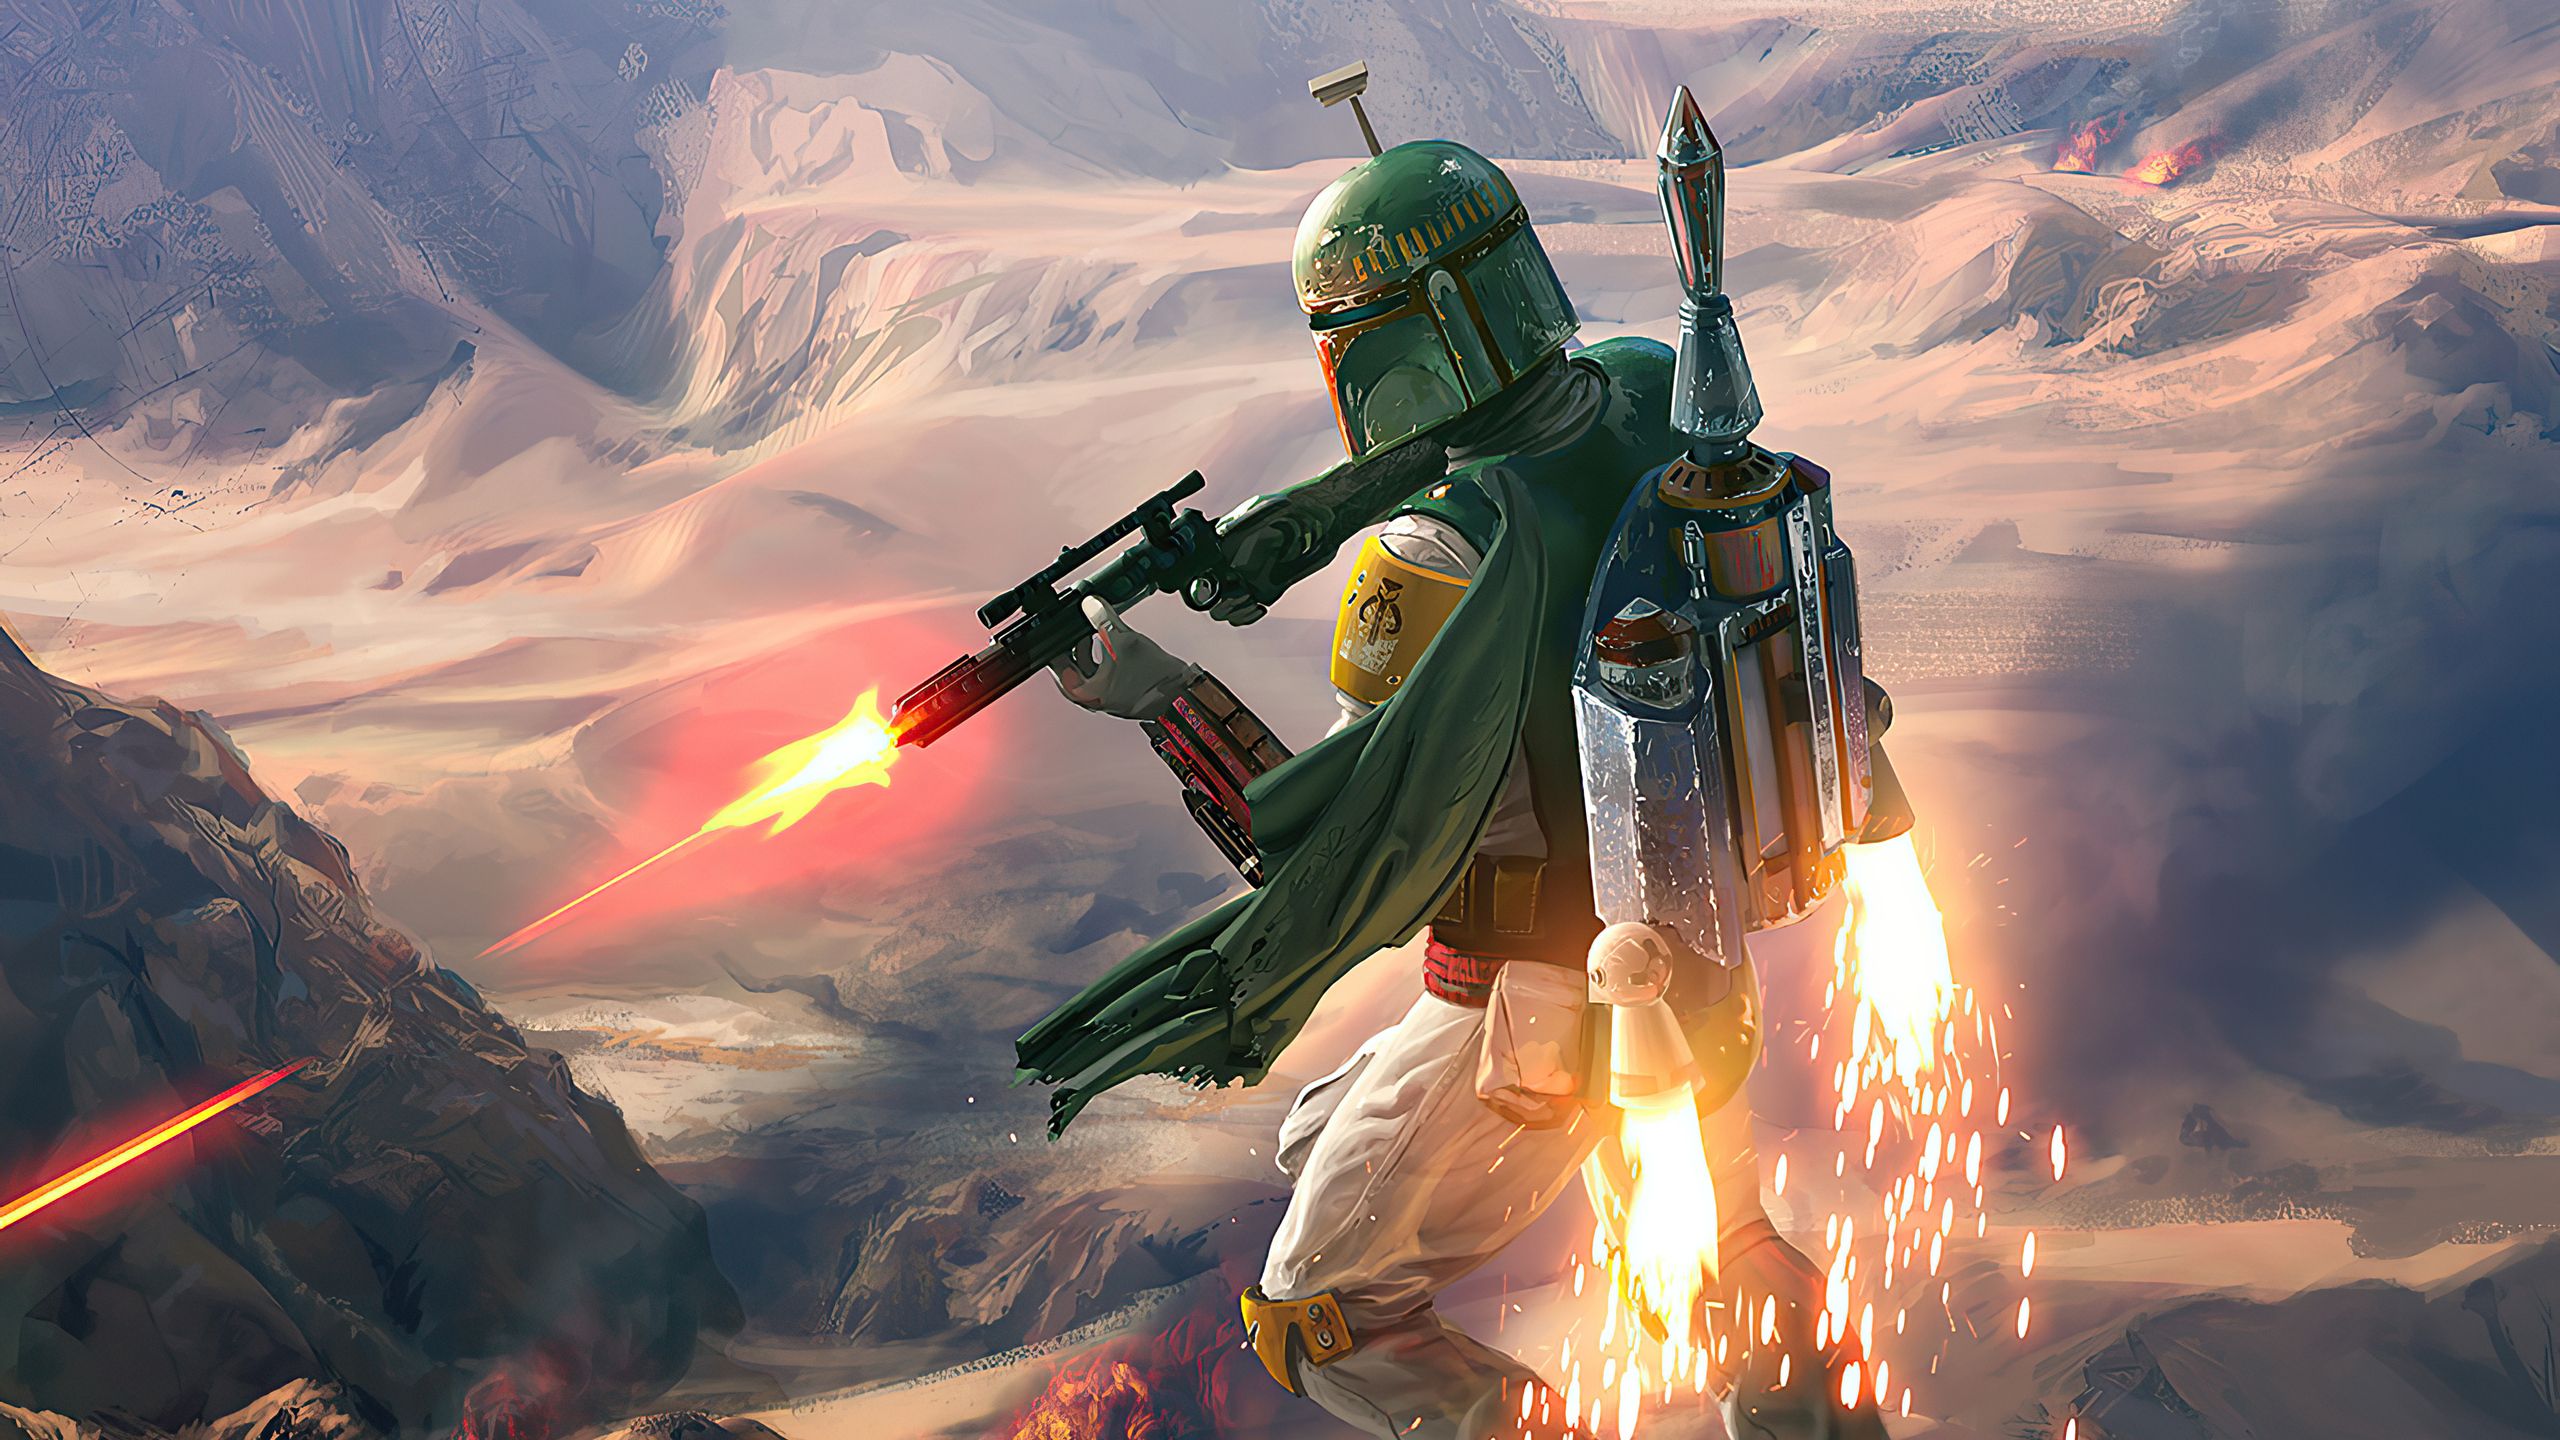 Boba Fett 2020 1440P Resolution HD 4k Wallpaper, Image, Background, Photo and Picture